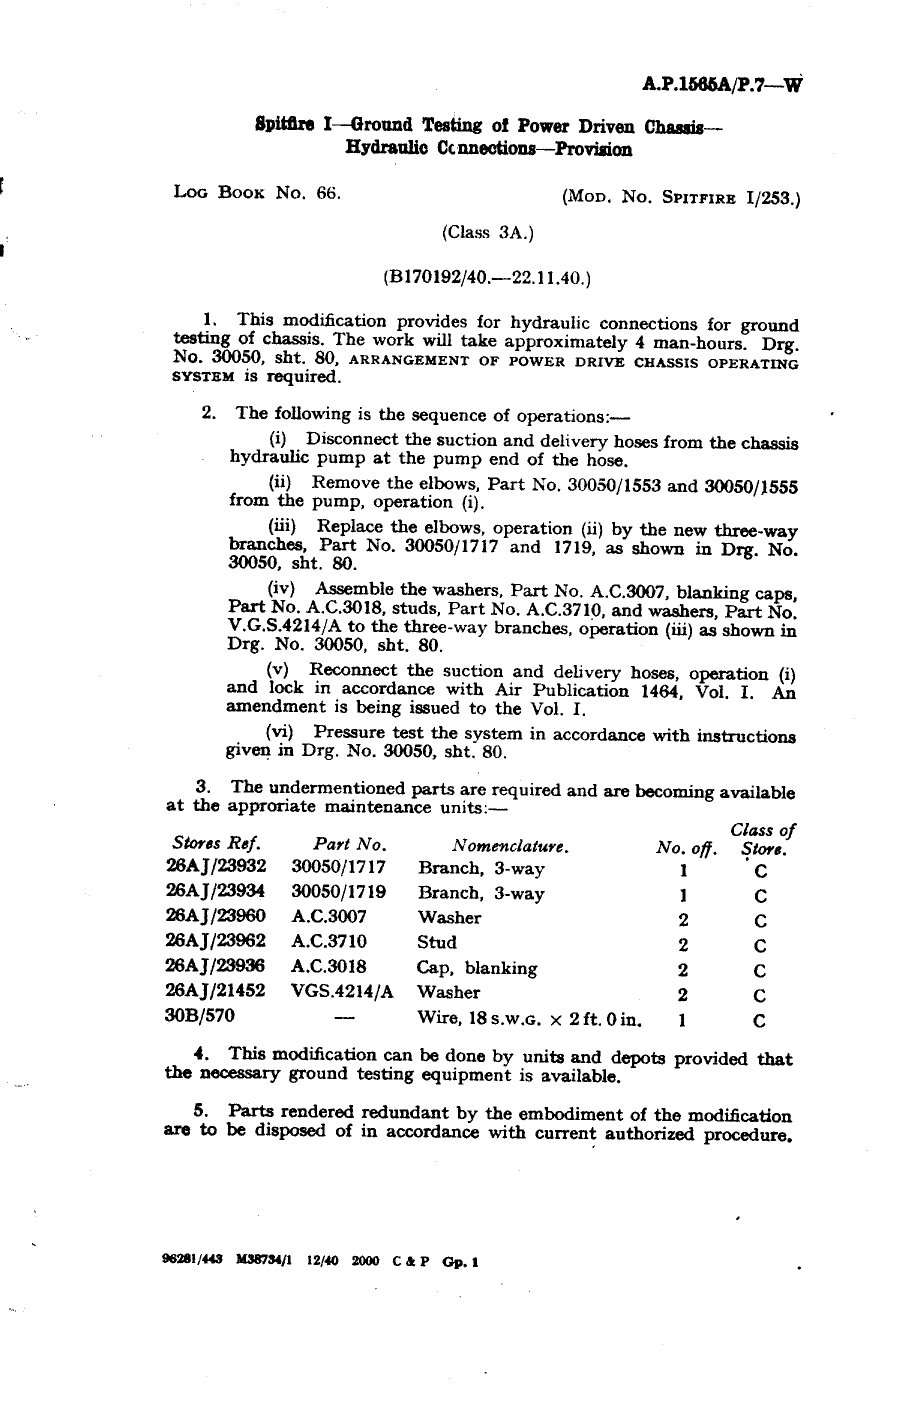 Sample page 1 from AirCorps Library document: Spitfire I Ground Testing of Power Driven Chassis Hydraulic Connections Provision